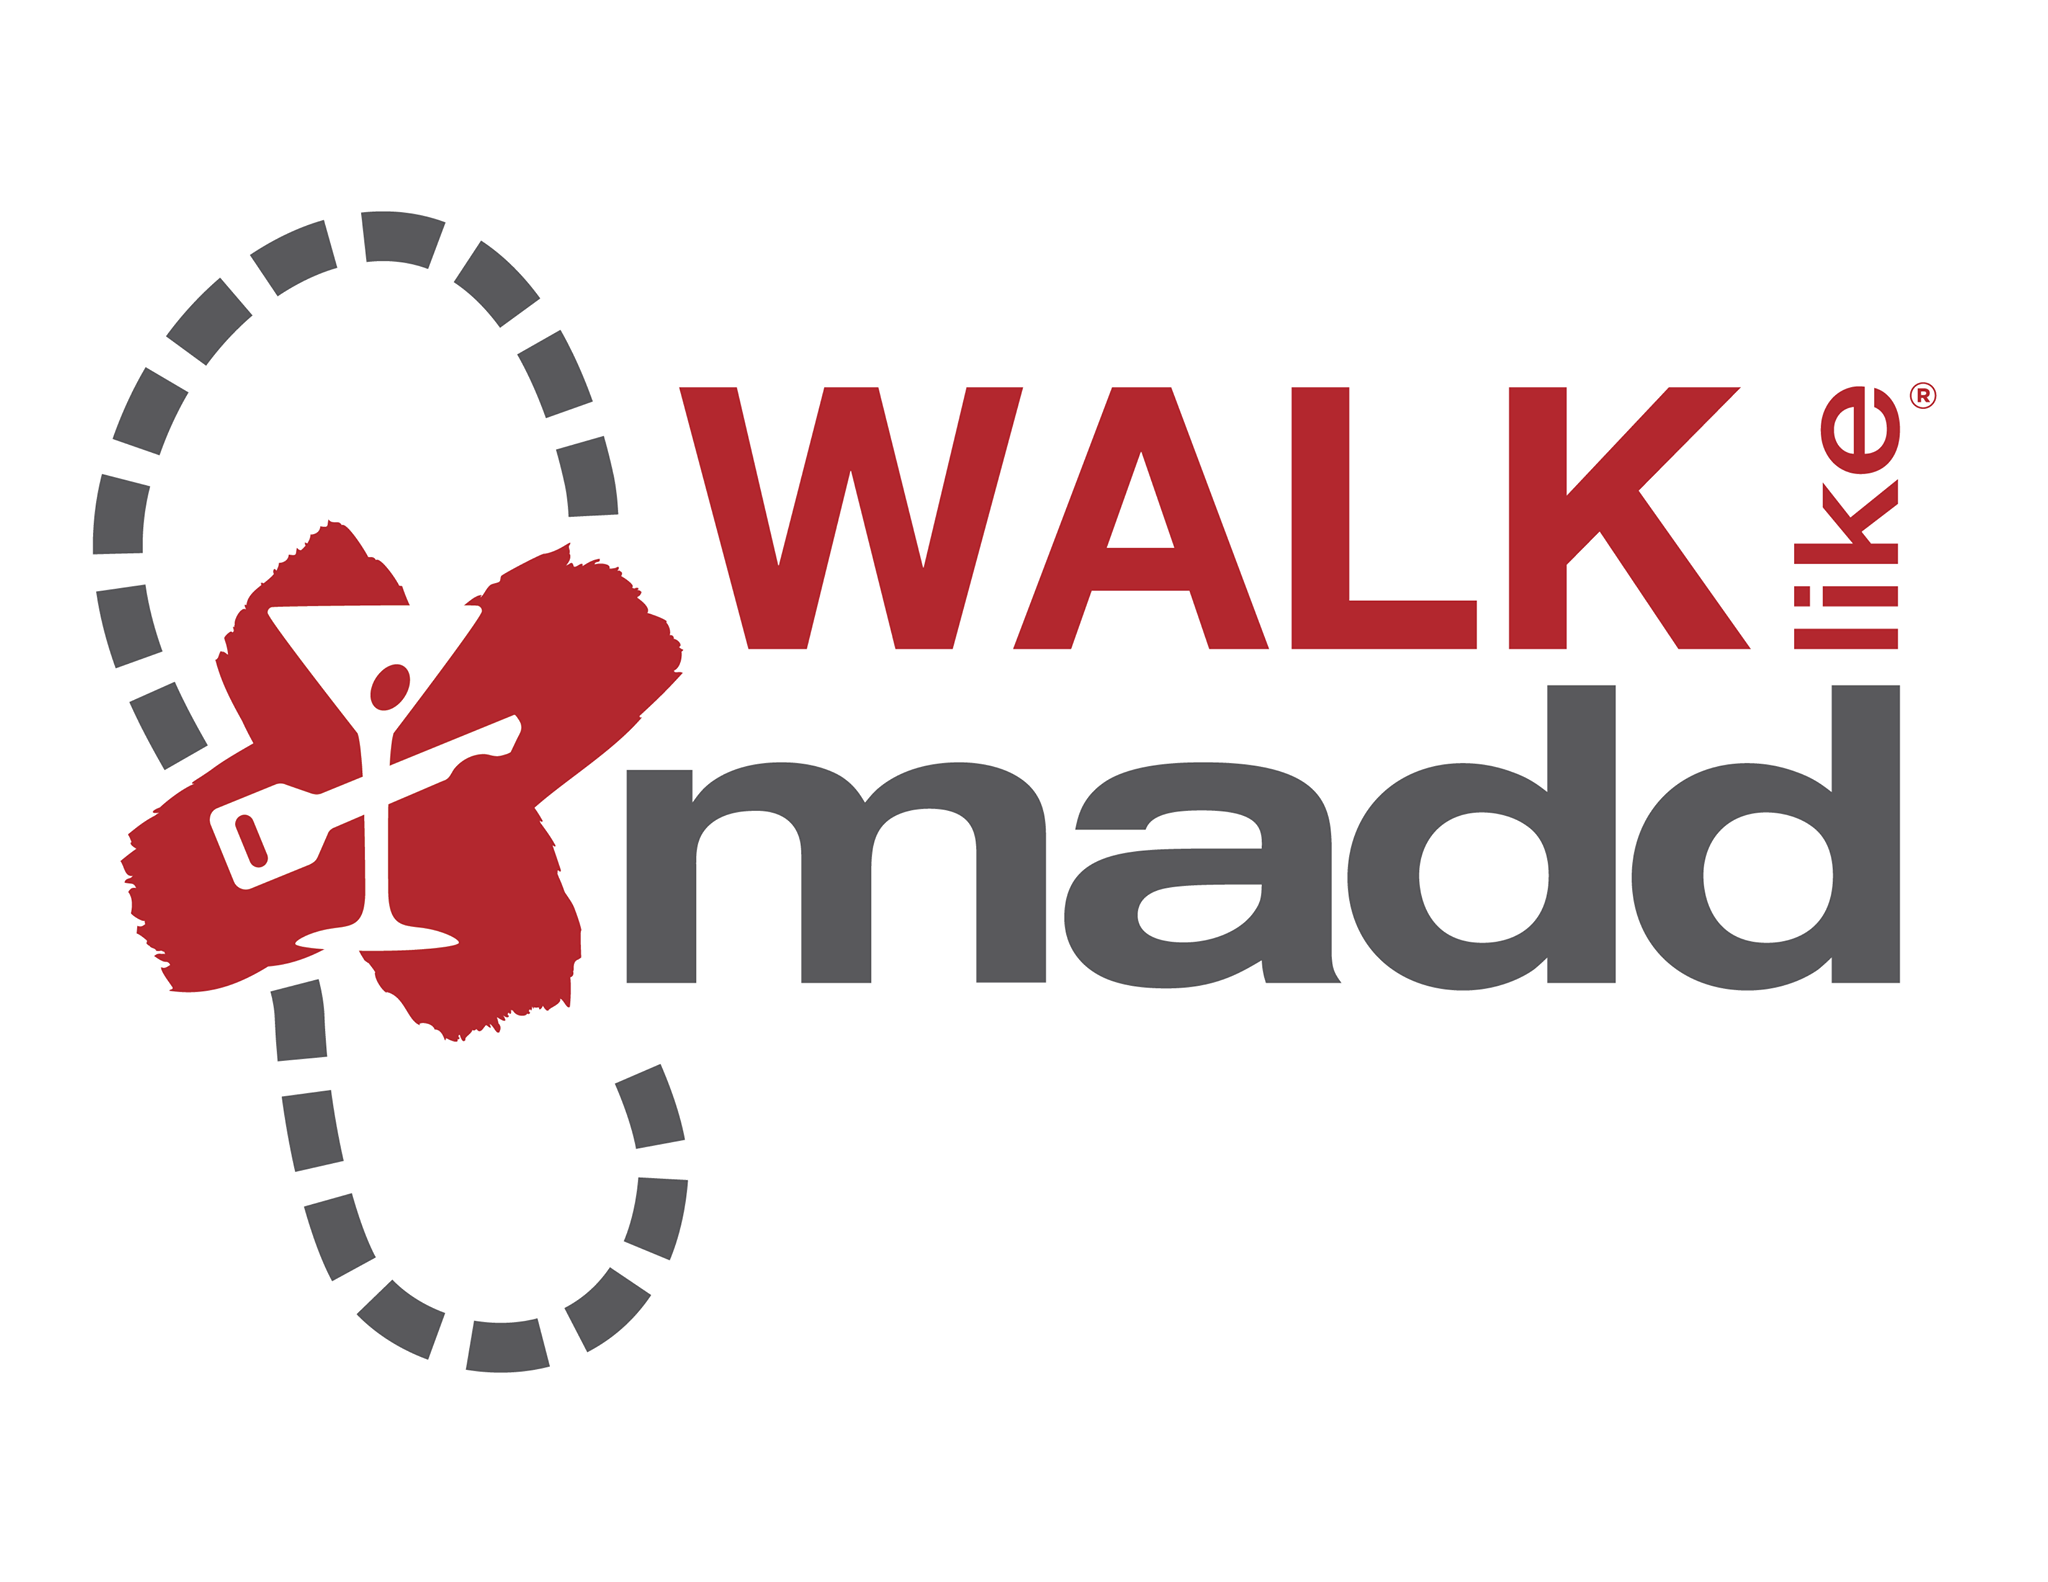 ‘Walk Like MADD’ Promotes Safety And Sobriety